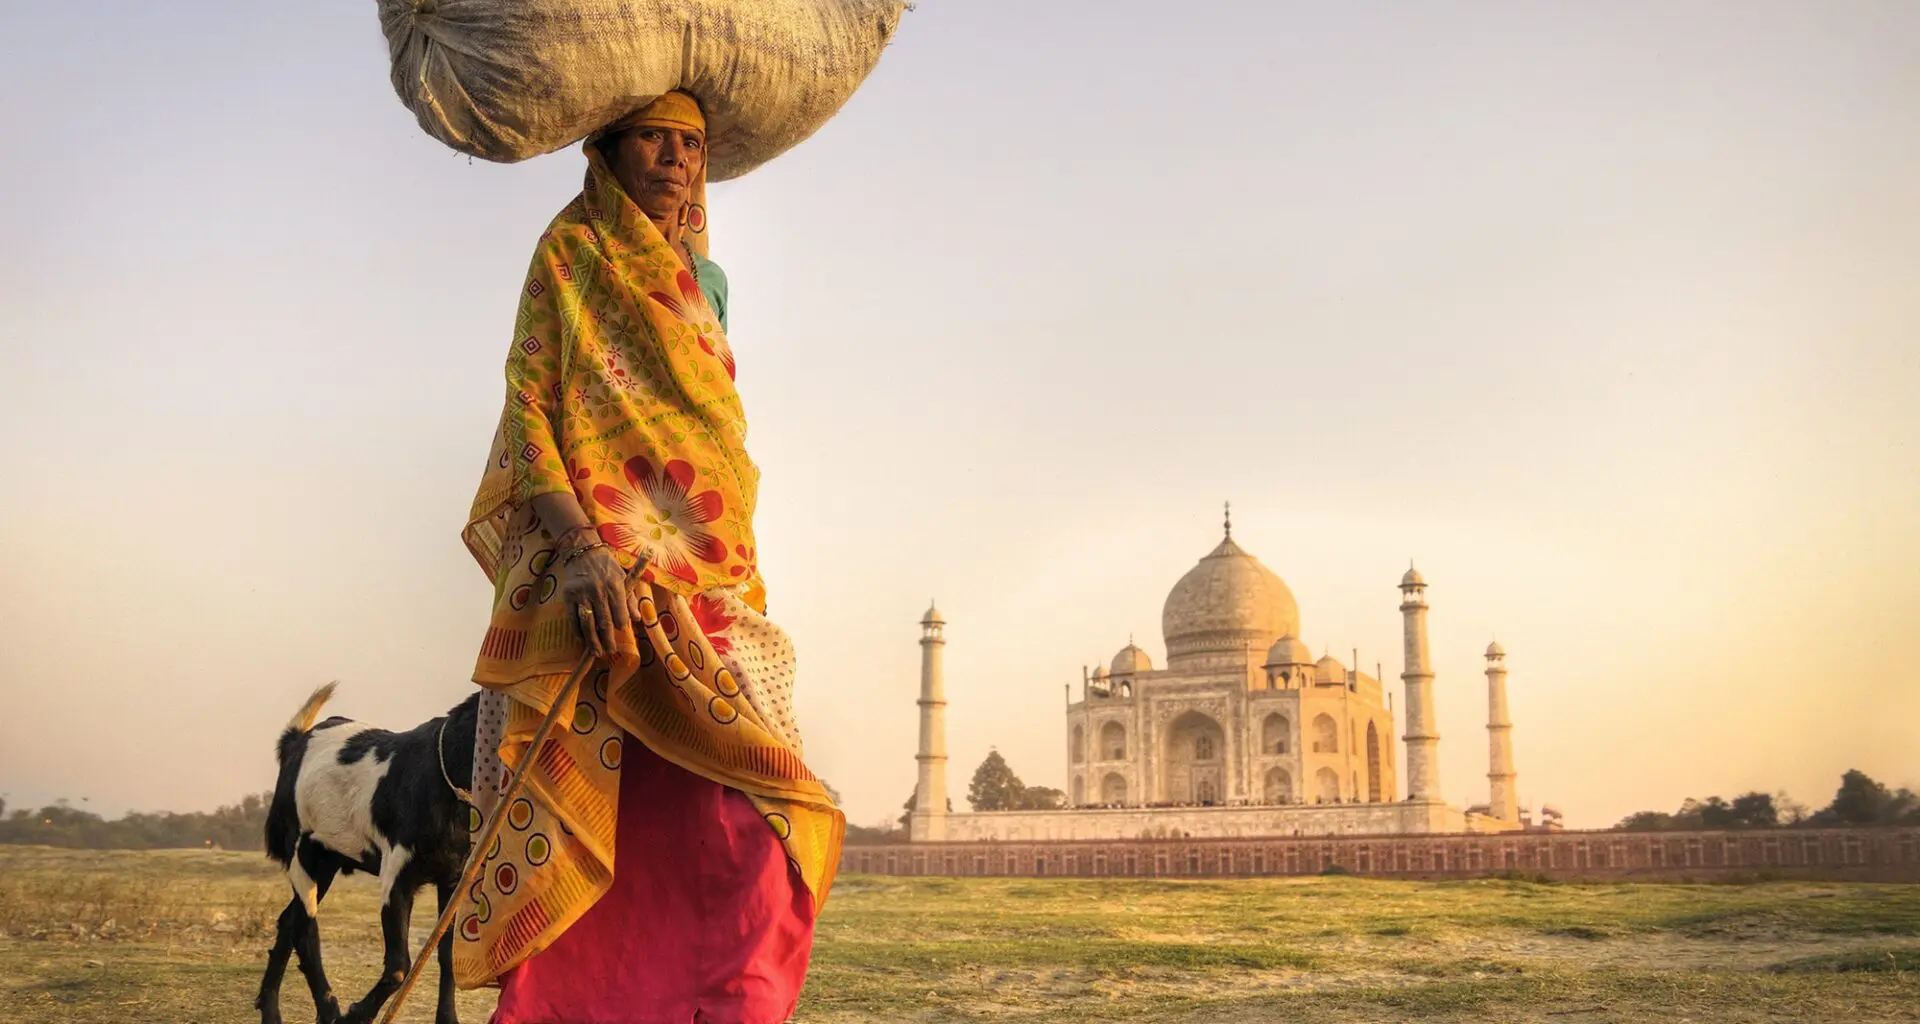 Indian Woman Carrying on Head and Goats near the Taj Mahal